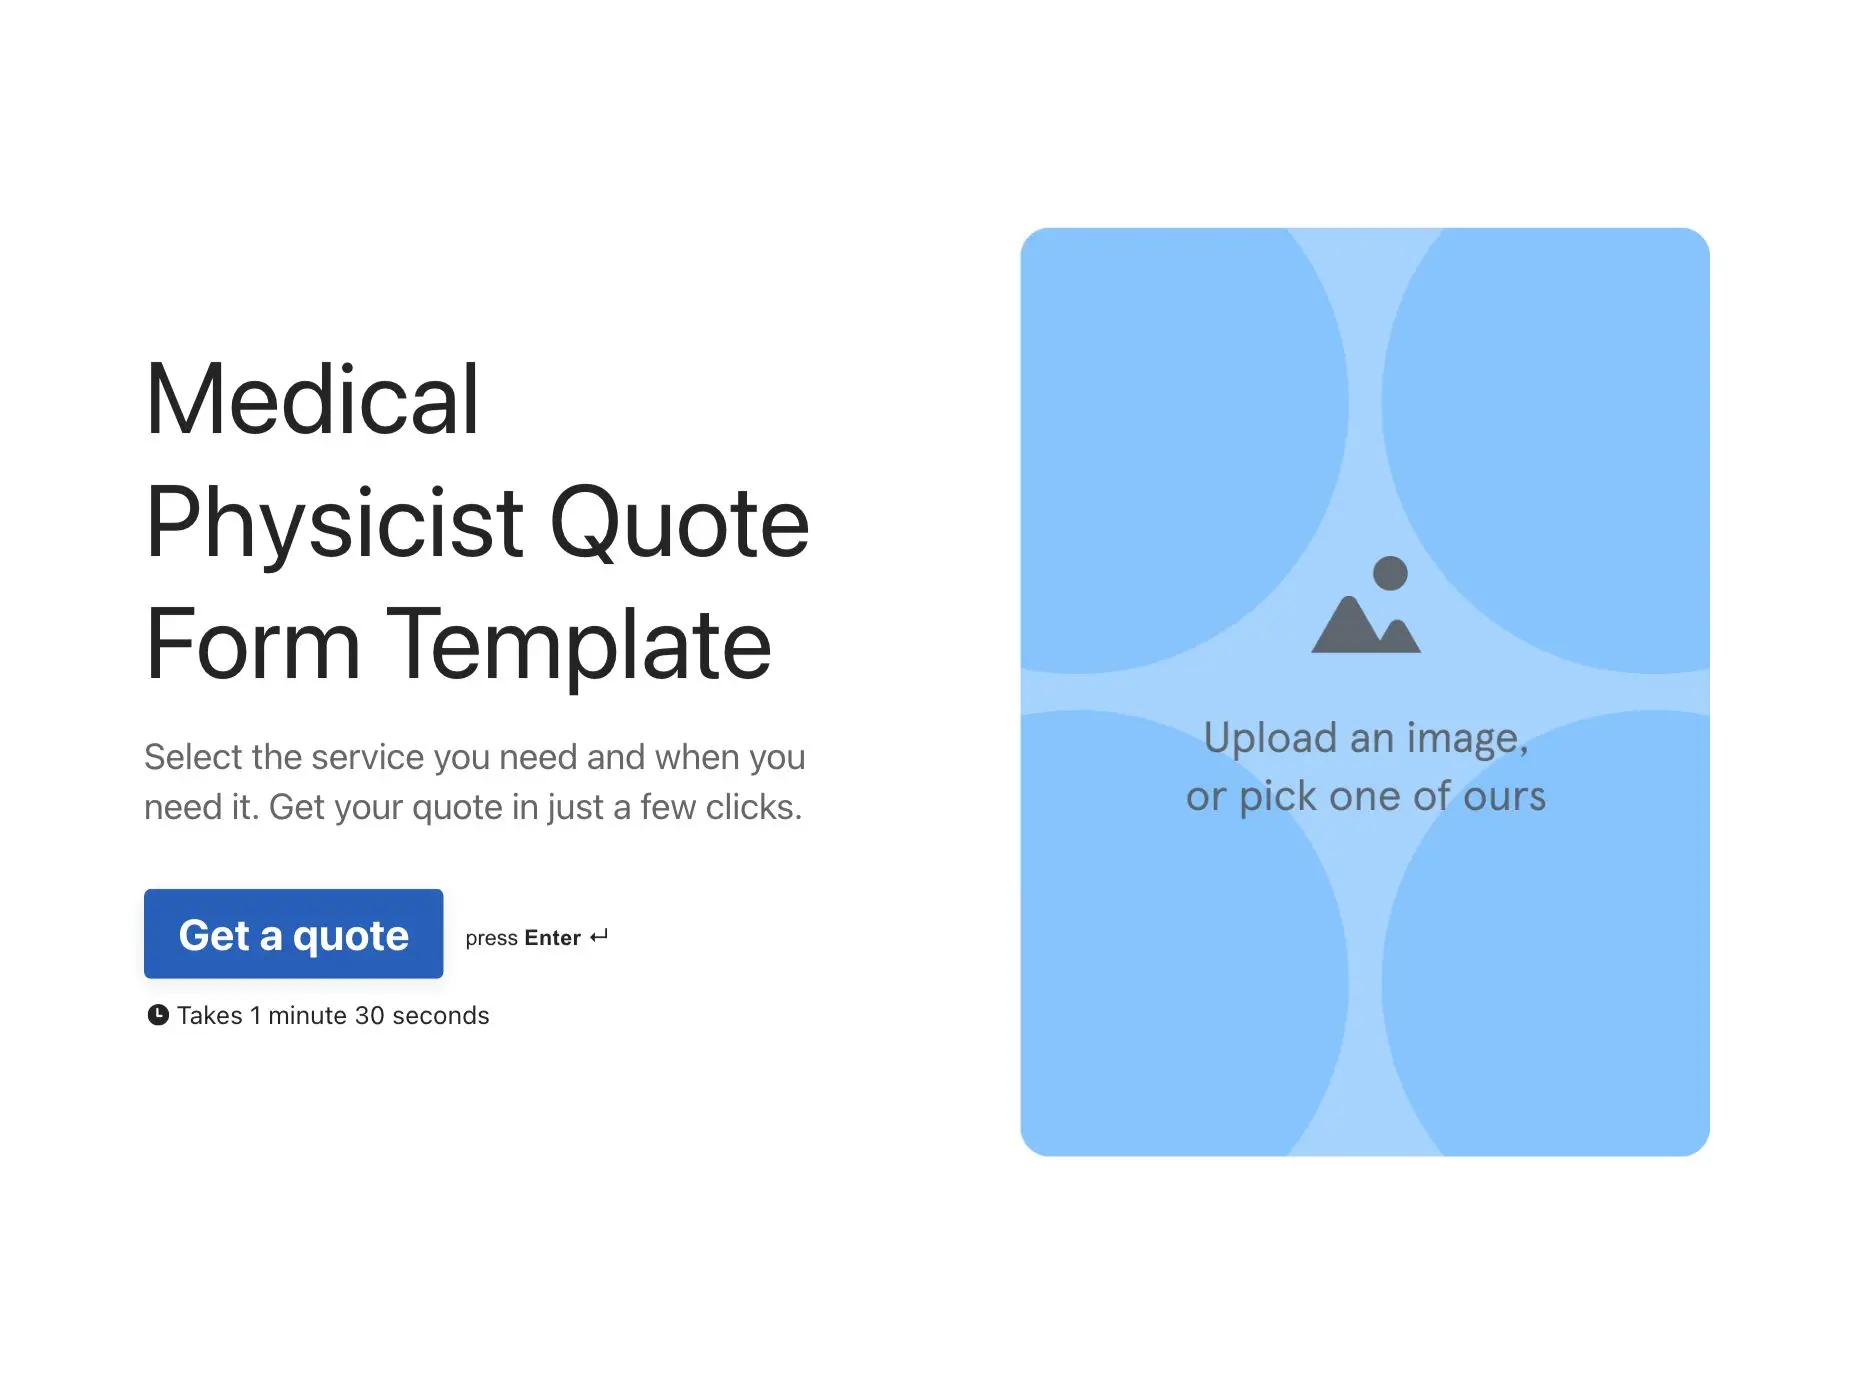 Medical Physicist Quote Form Template Hero